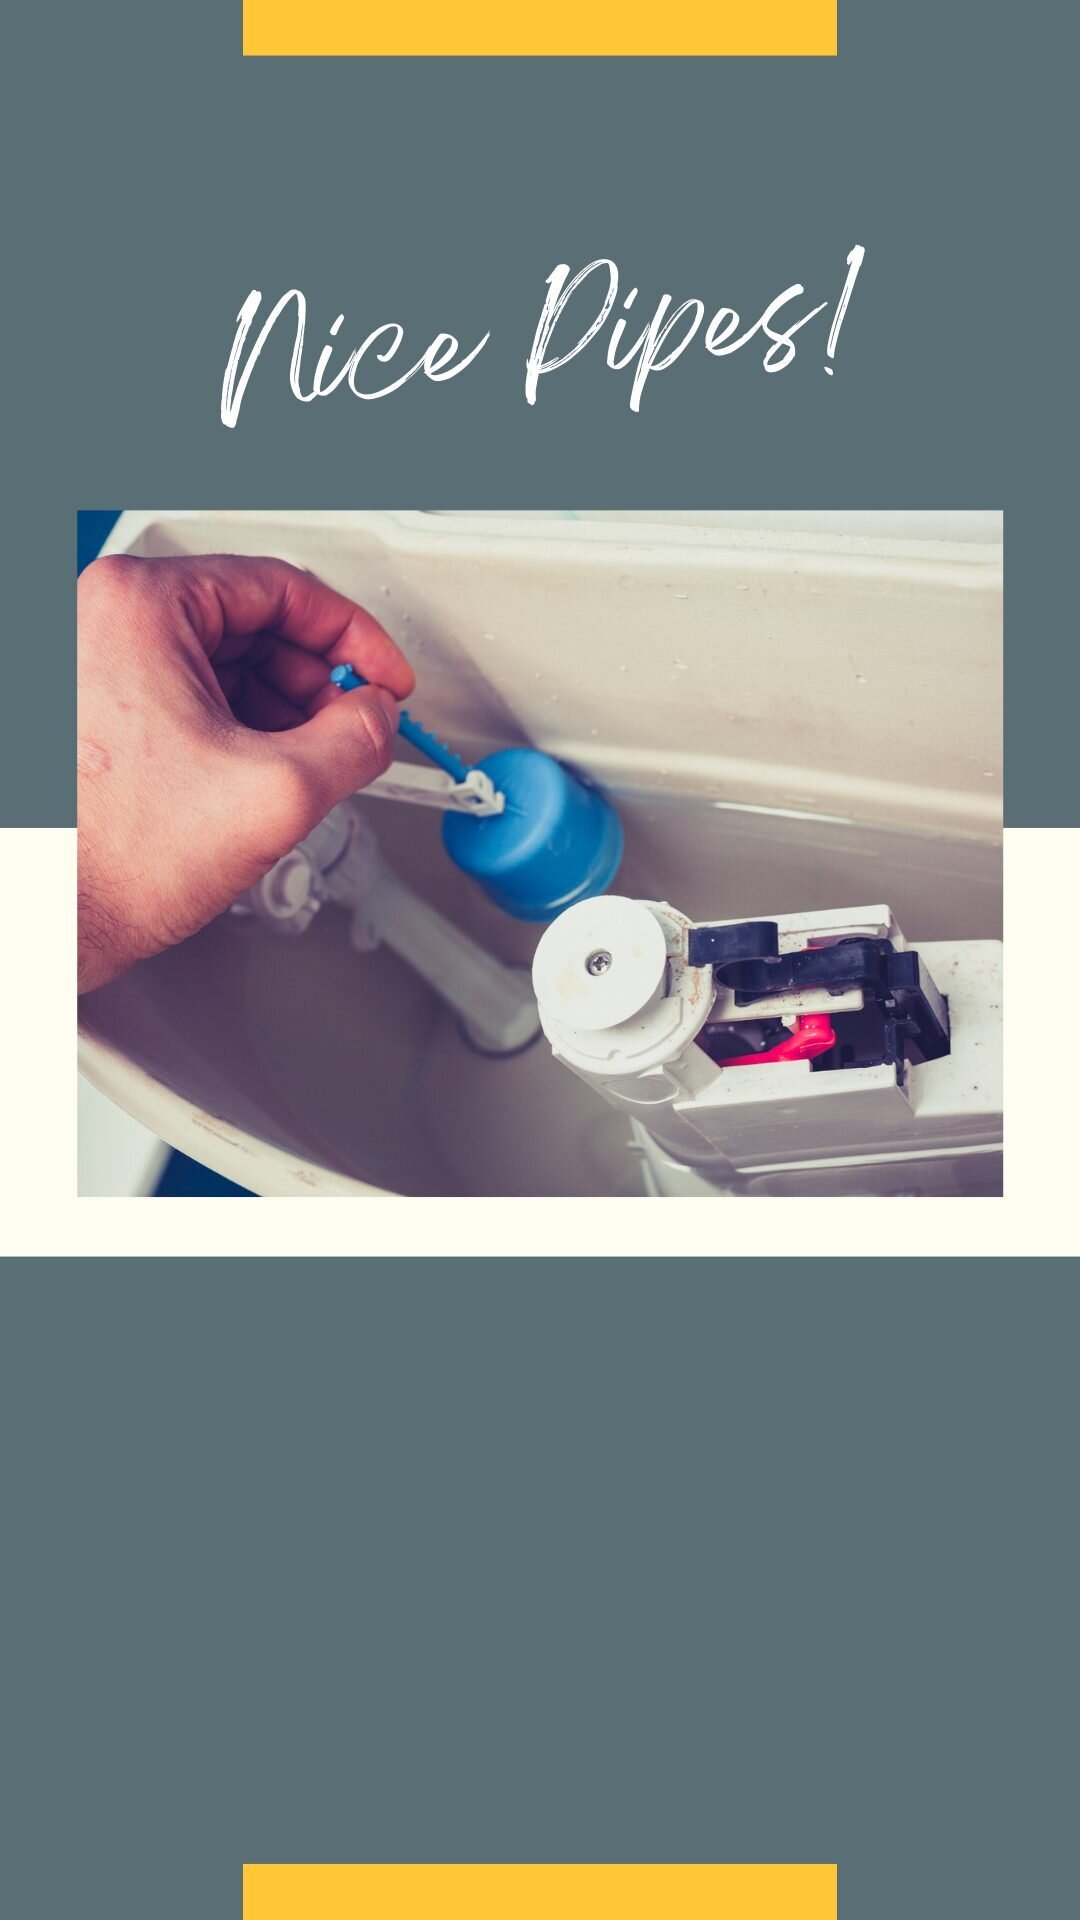 Fixing your toilet really stinks. 

Especially when you go to start the job and you realize that the shut-off valve won't shut off! 

But there is no need to spring a leak &ndash; it's an easy fix you can do yourself:

-First, turn off your main wate